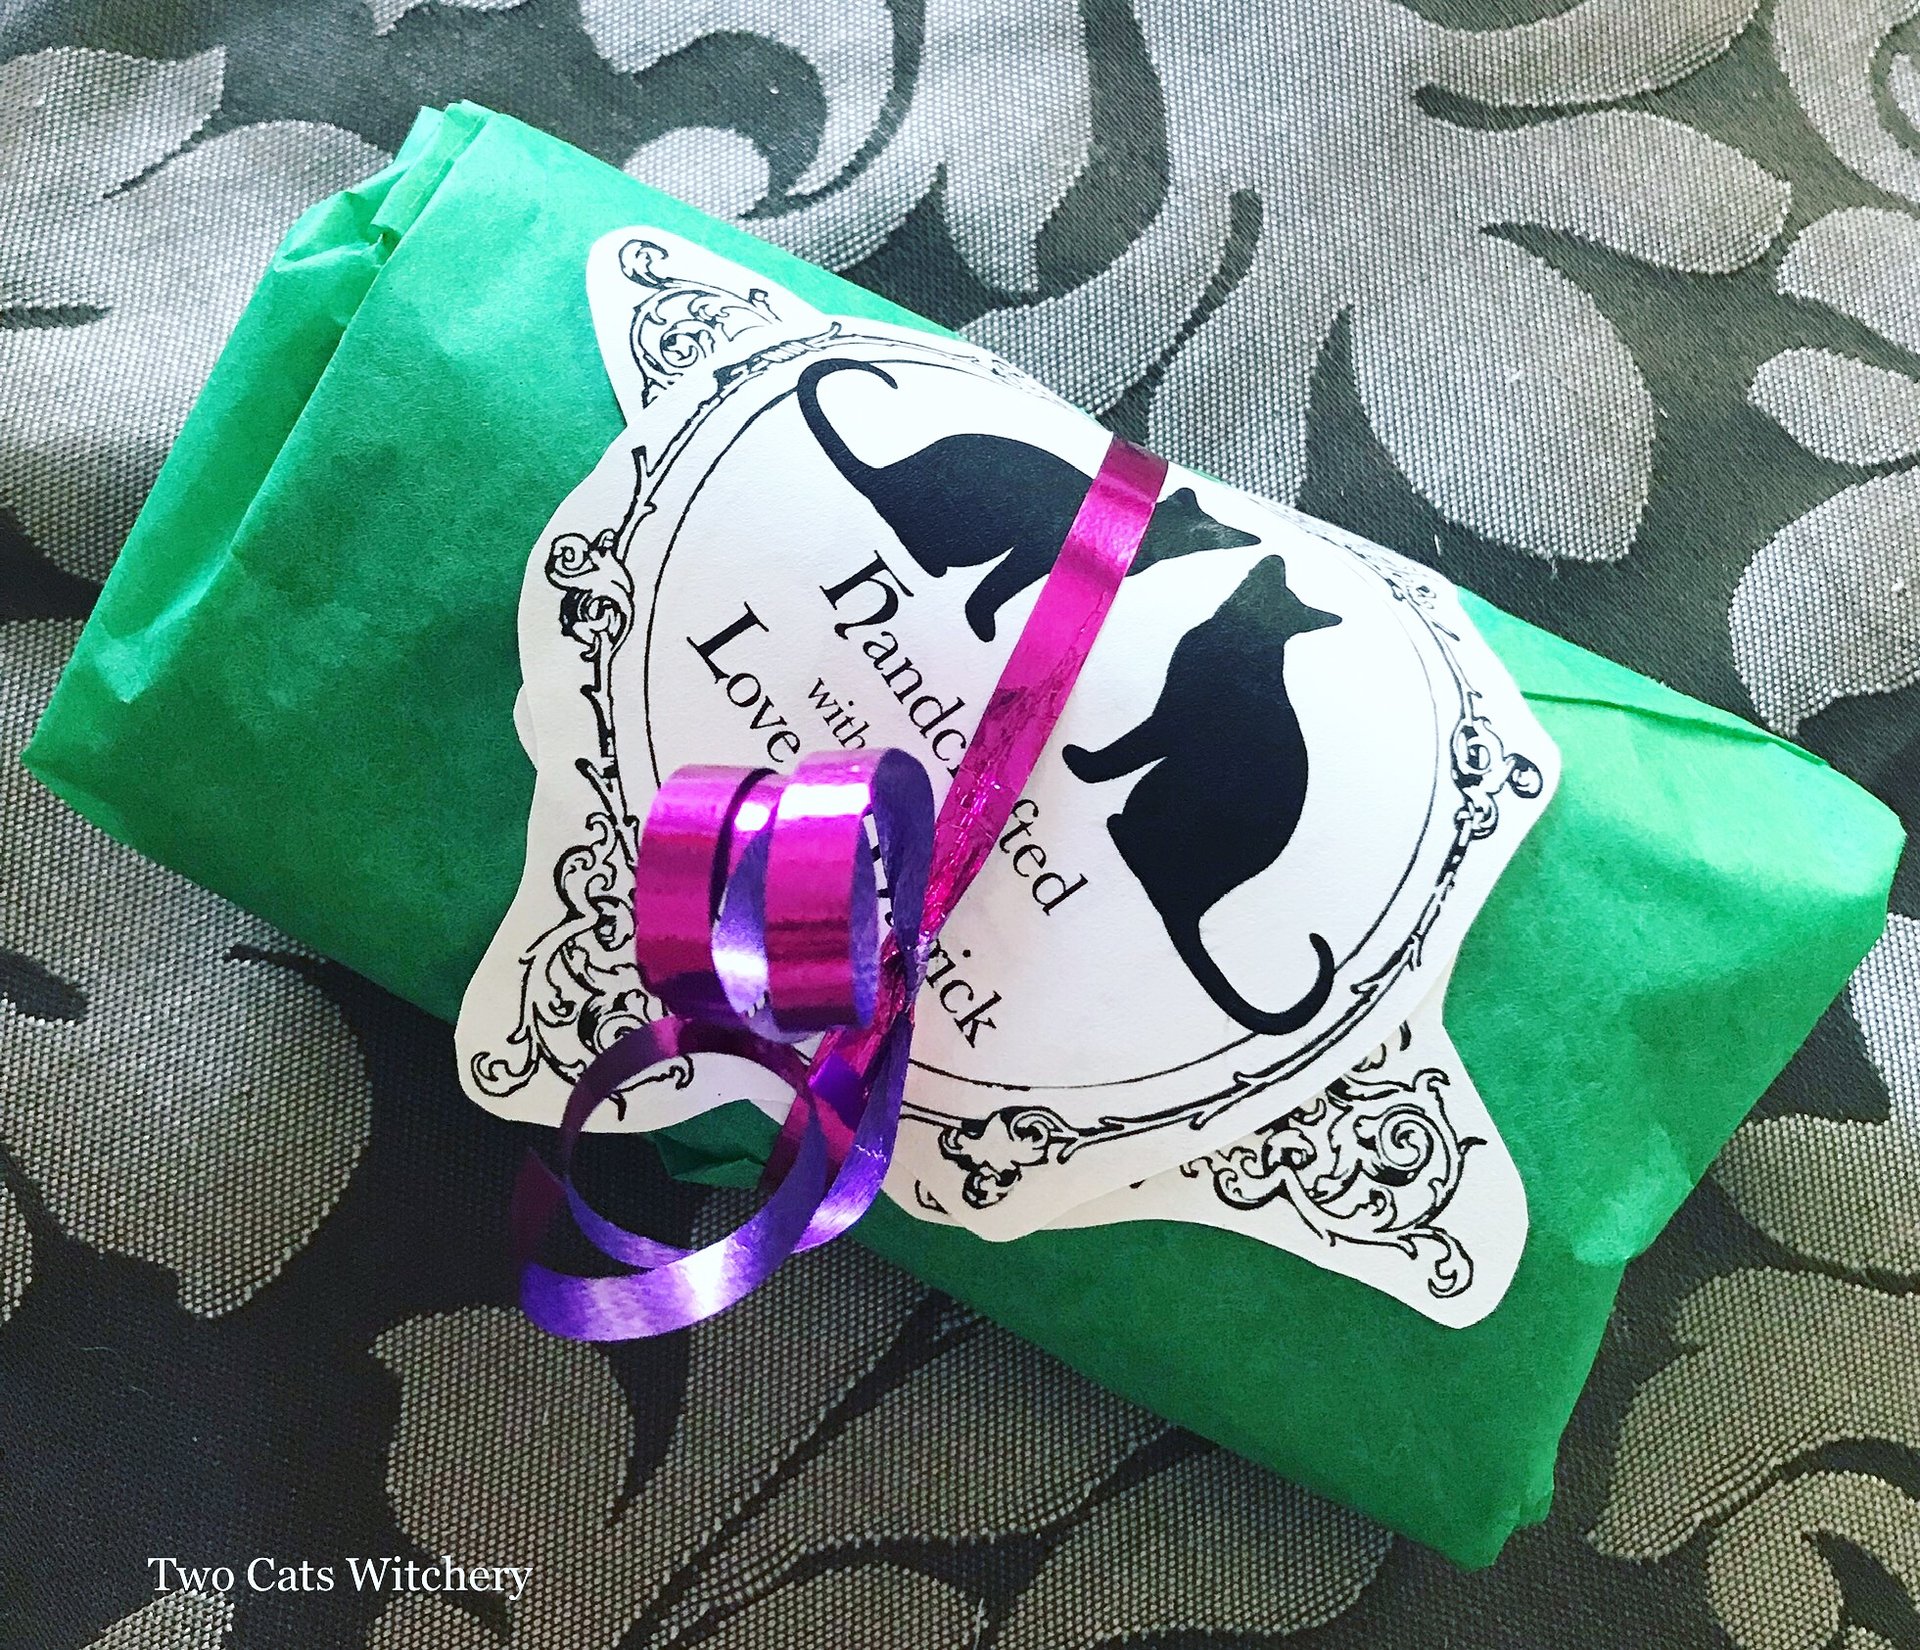 Package from Two Cats Witchery store